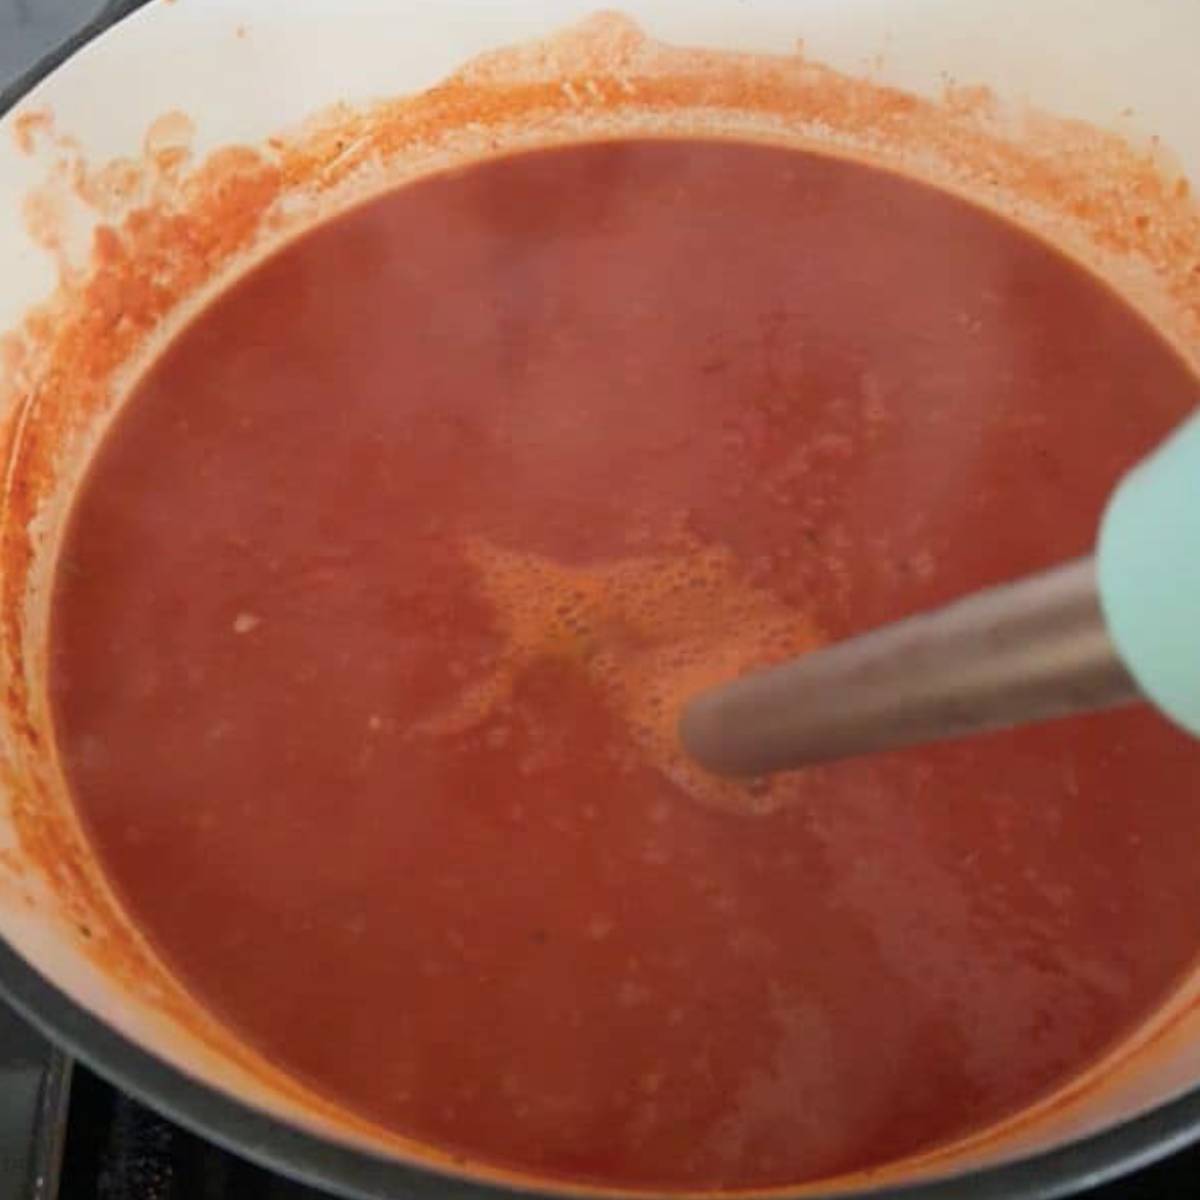 Immersion blender creating a creamy texture in tomato soup.